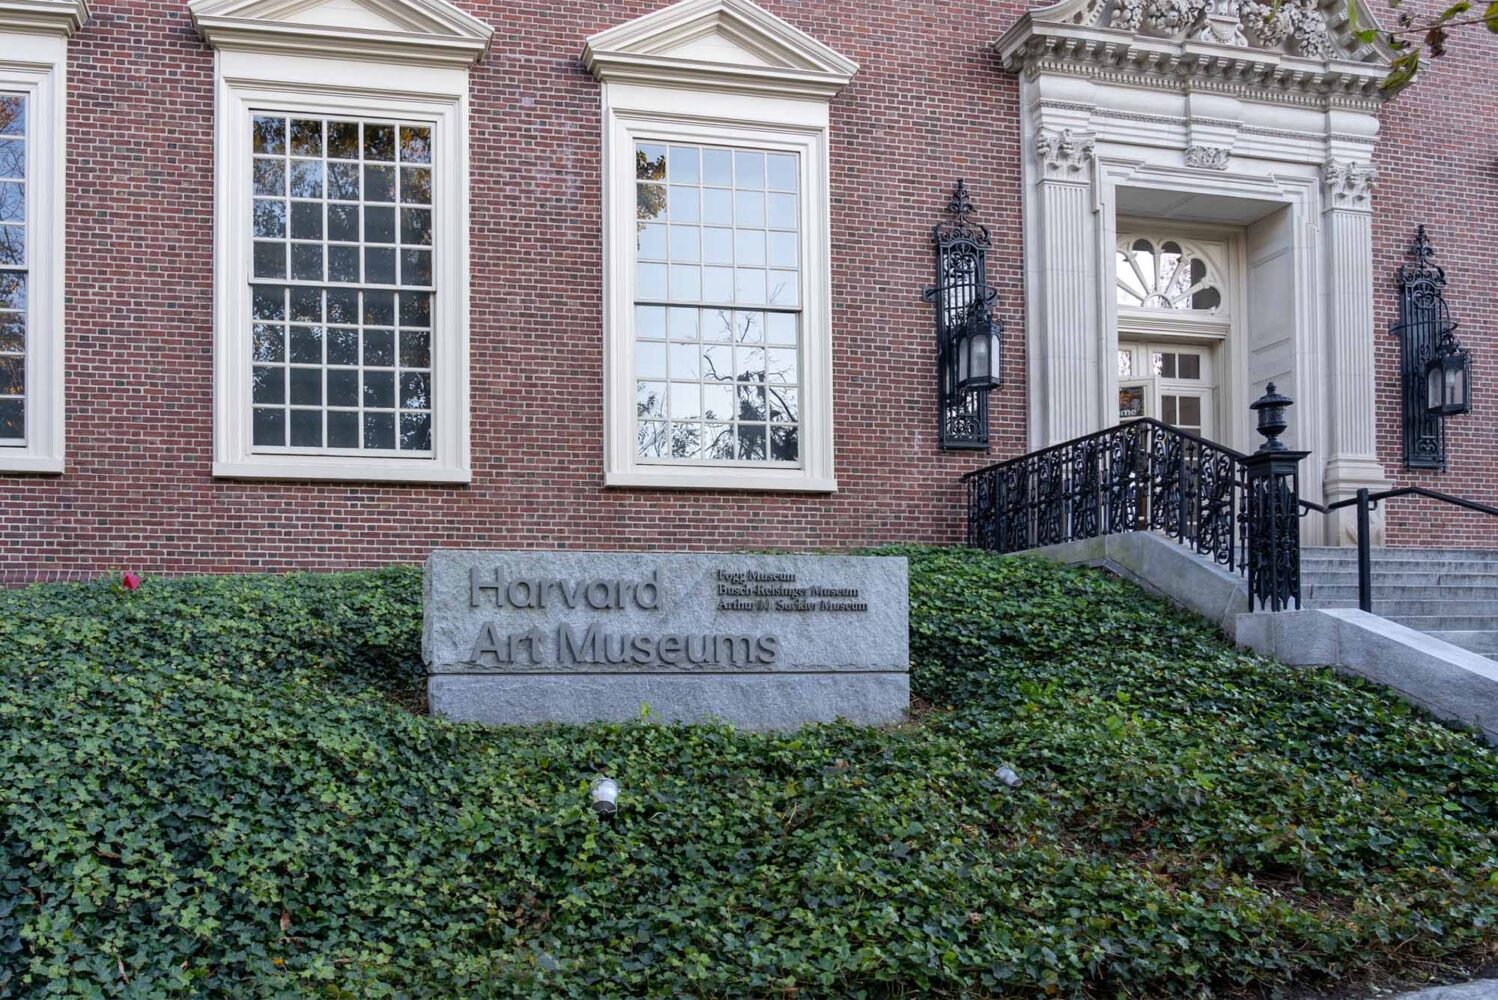 Photo: The front of Harvard Art Museum, with a sign depicting the name in stone letters